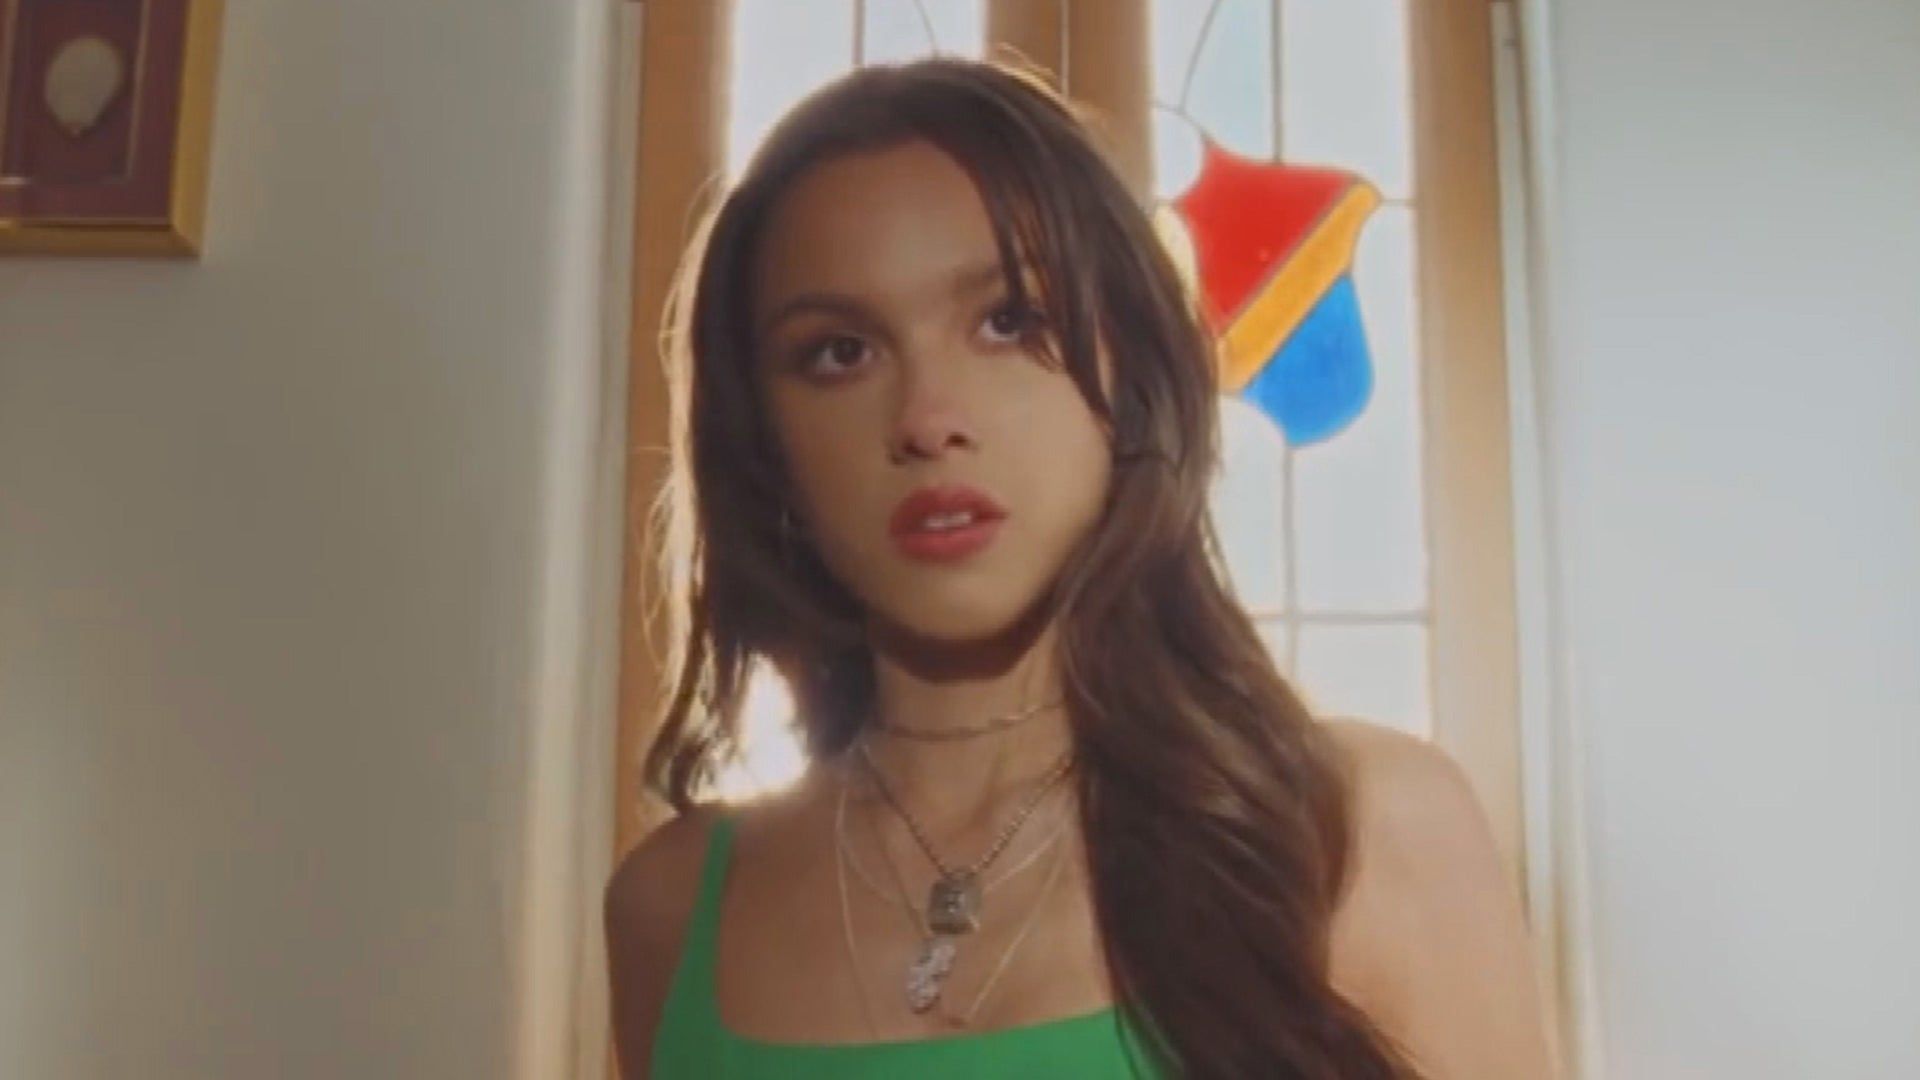 Olivia Rodrigo's New Single 'Deja Vu' Is About an Ex Who's Moved on With Someone Similar